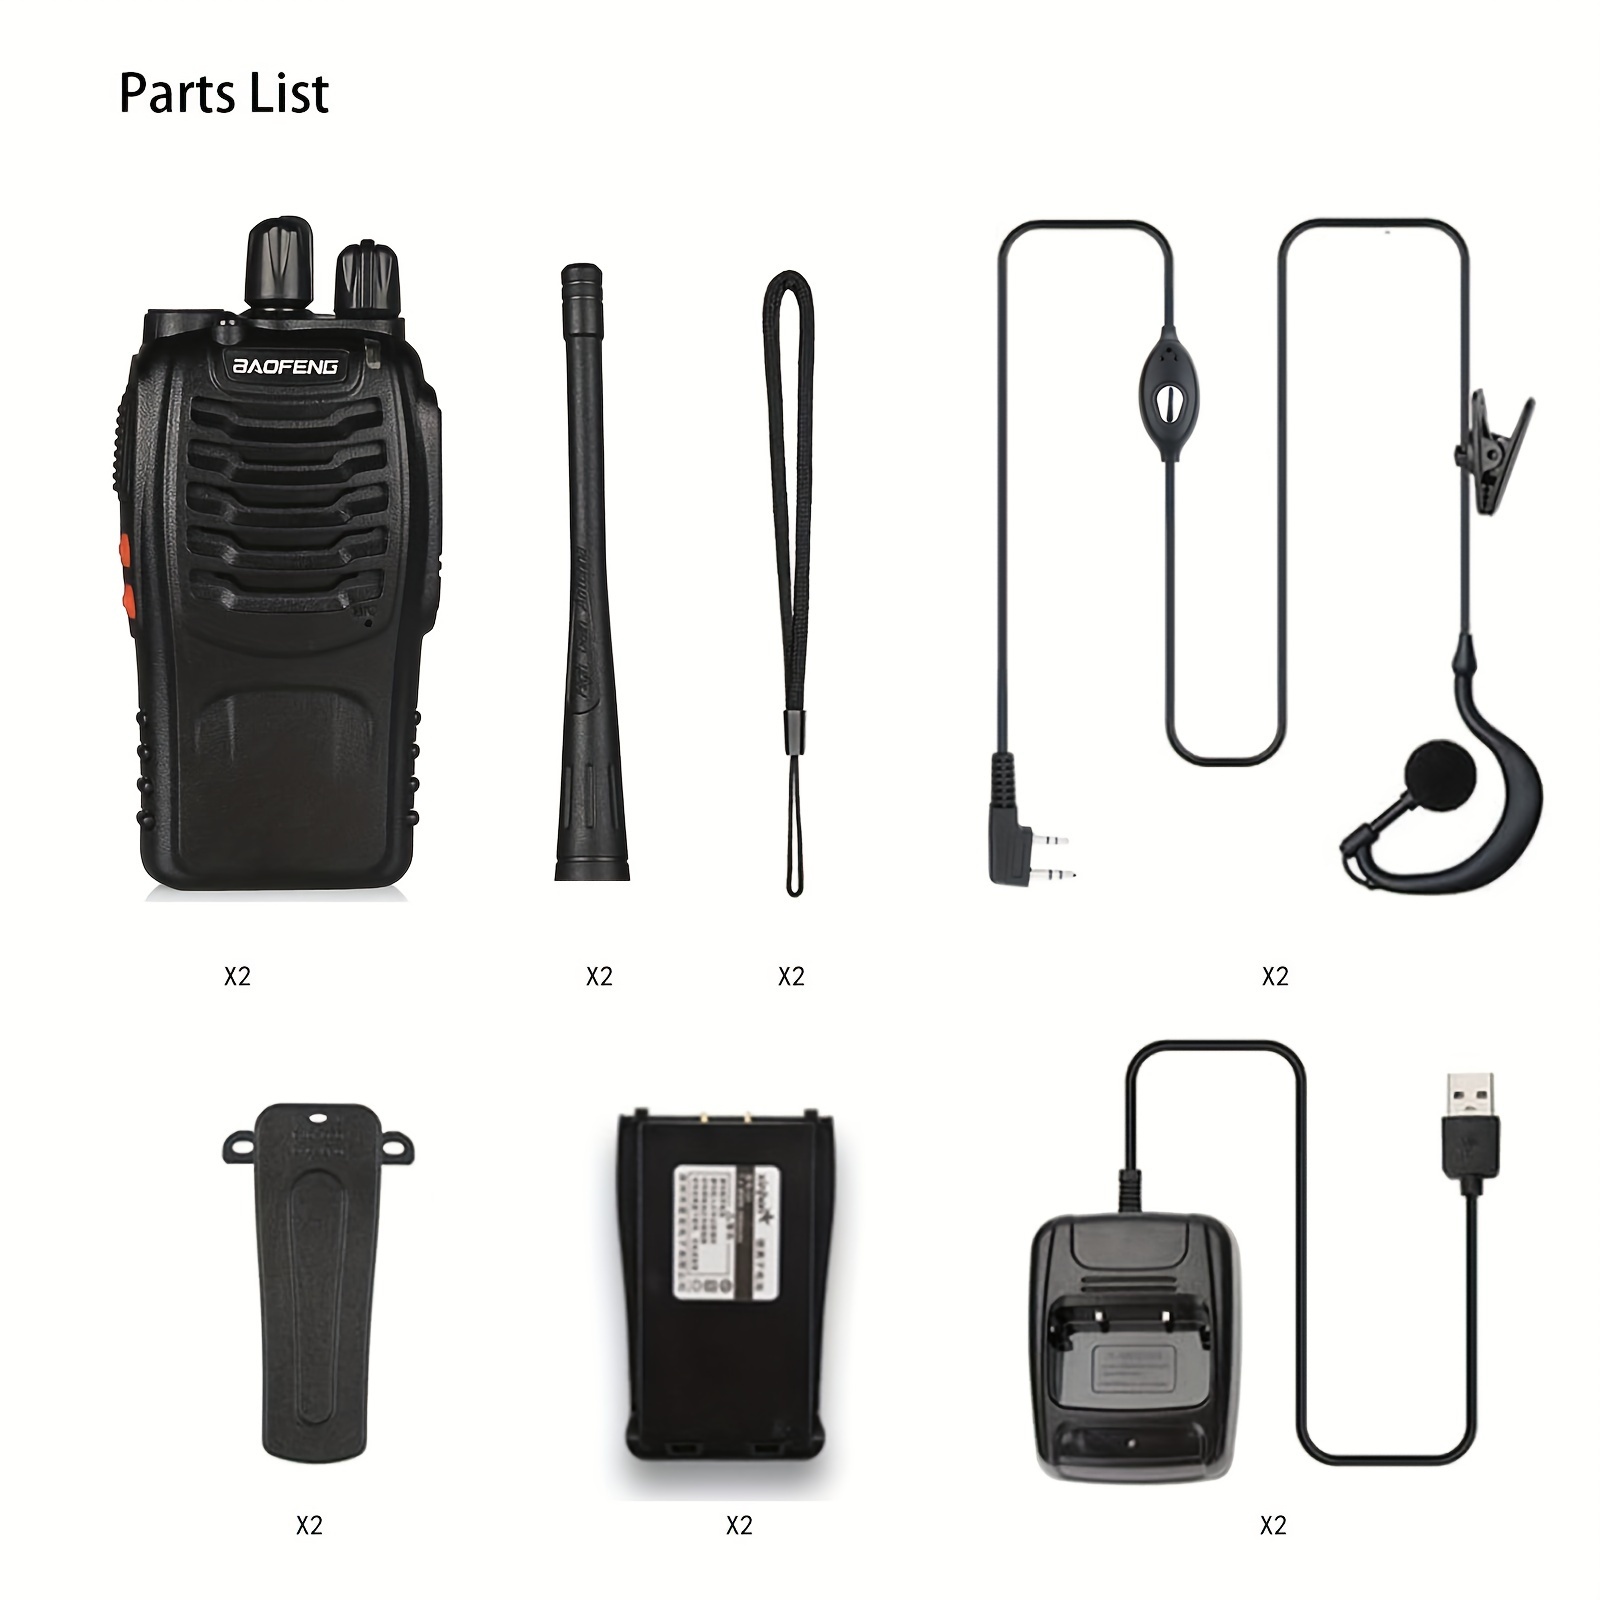 * BF-888S Two Way Radio - Portable Walkie Talkie With Bulit In LED  Flashlight And Headphones For Outdoor Adventures